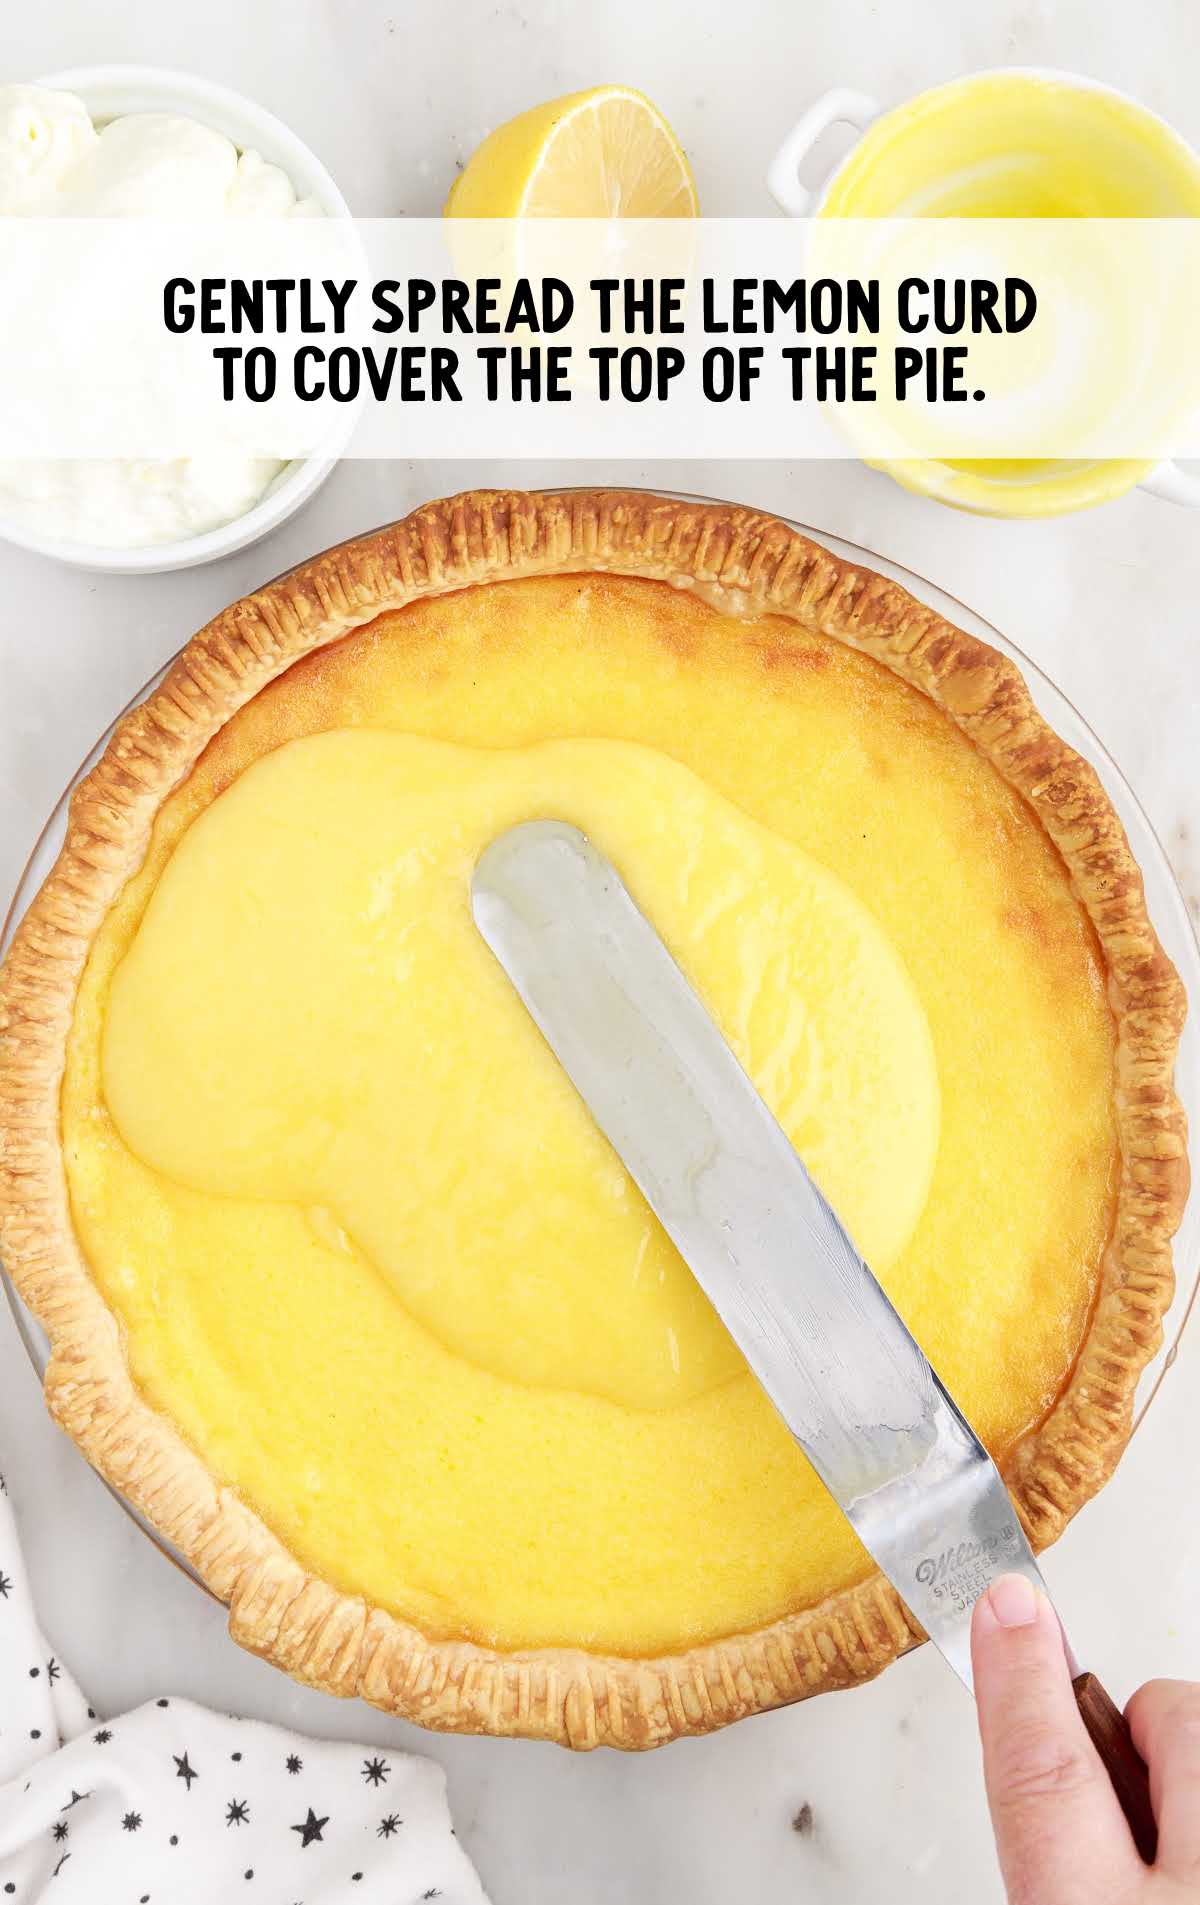 lemon curd spread to cover the top of the pie